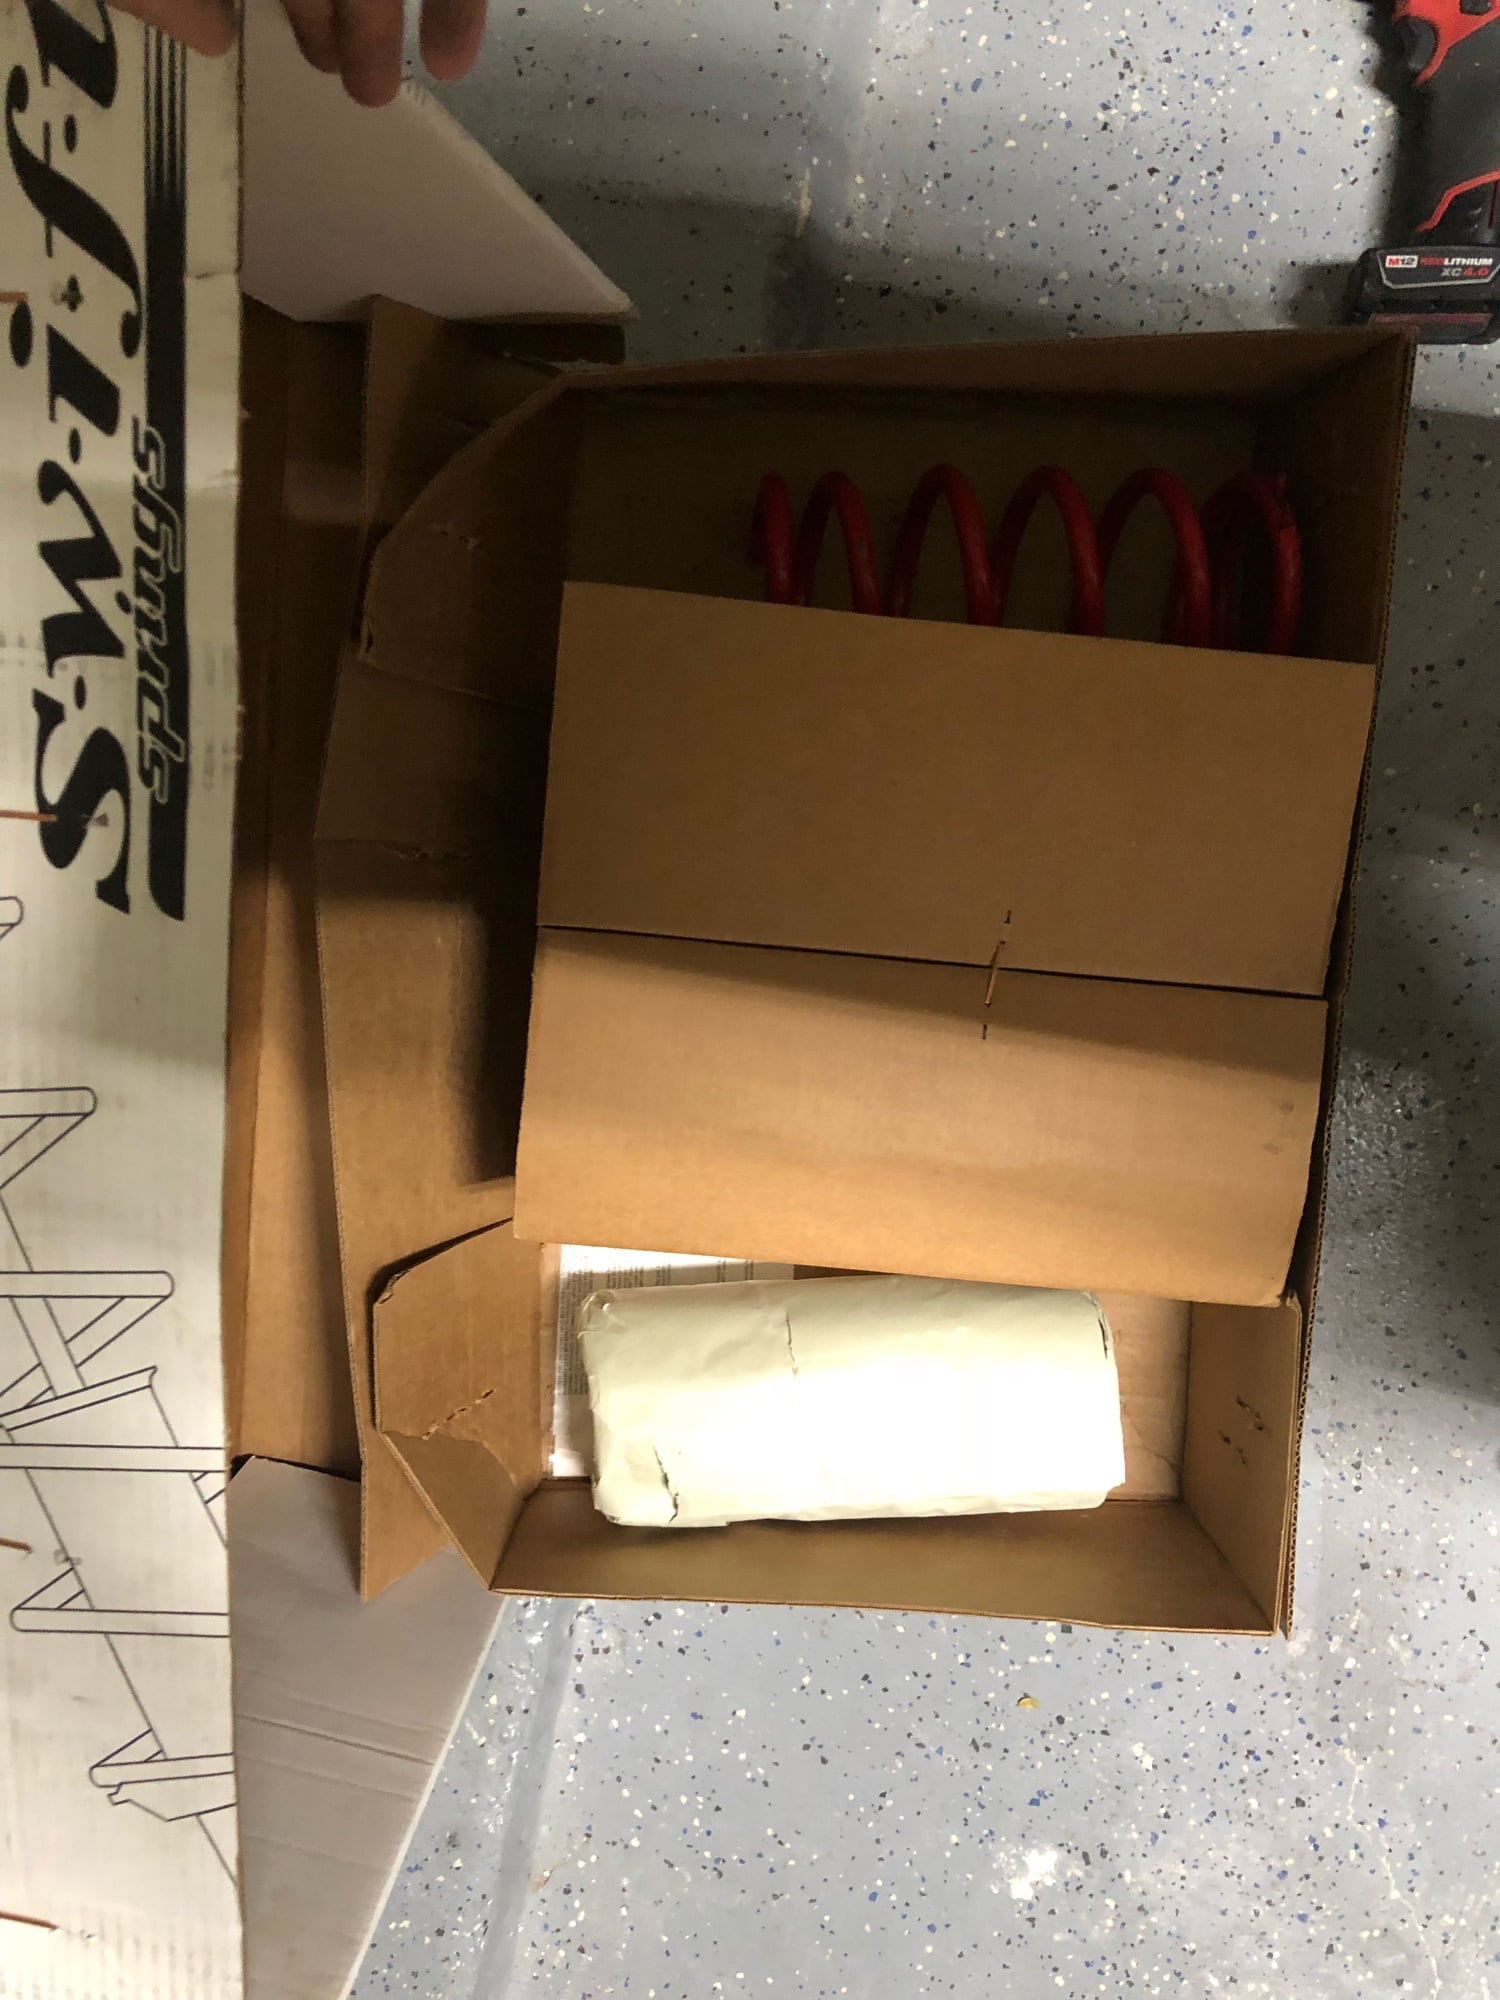 Steering/Suspension - Swift Springs for 3IS RWD - $240 shipped - New - 2014 to 2019 Lexus IS350 - Austin, TX 78758, United States